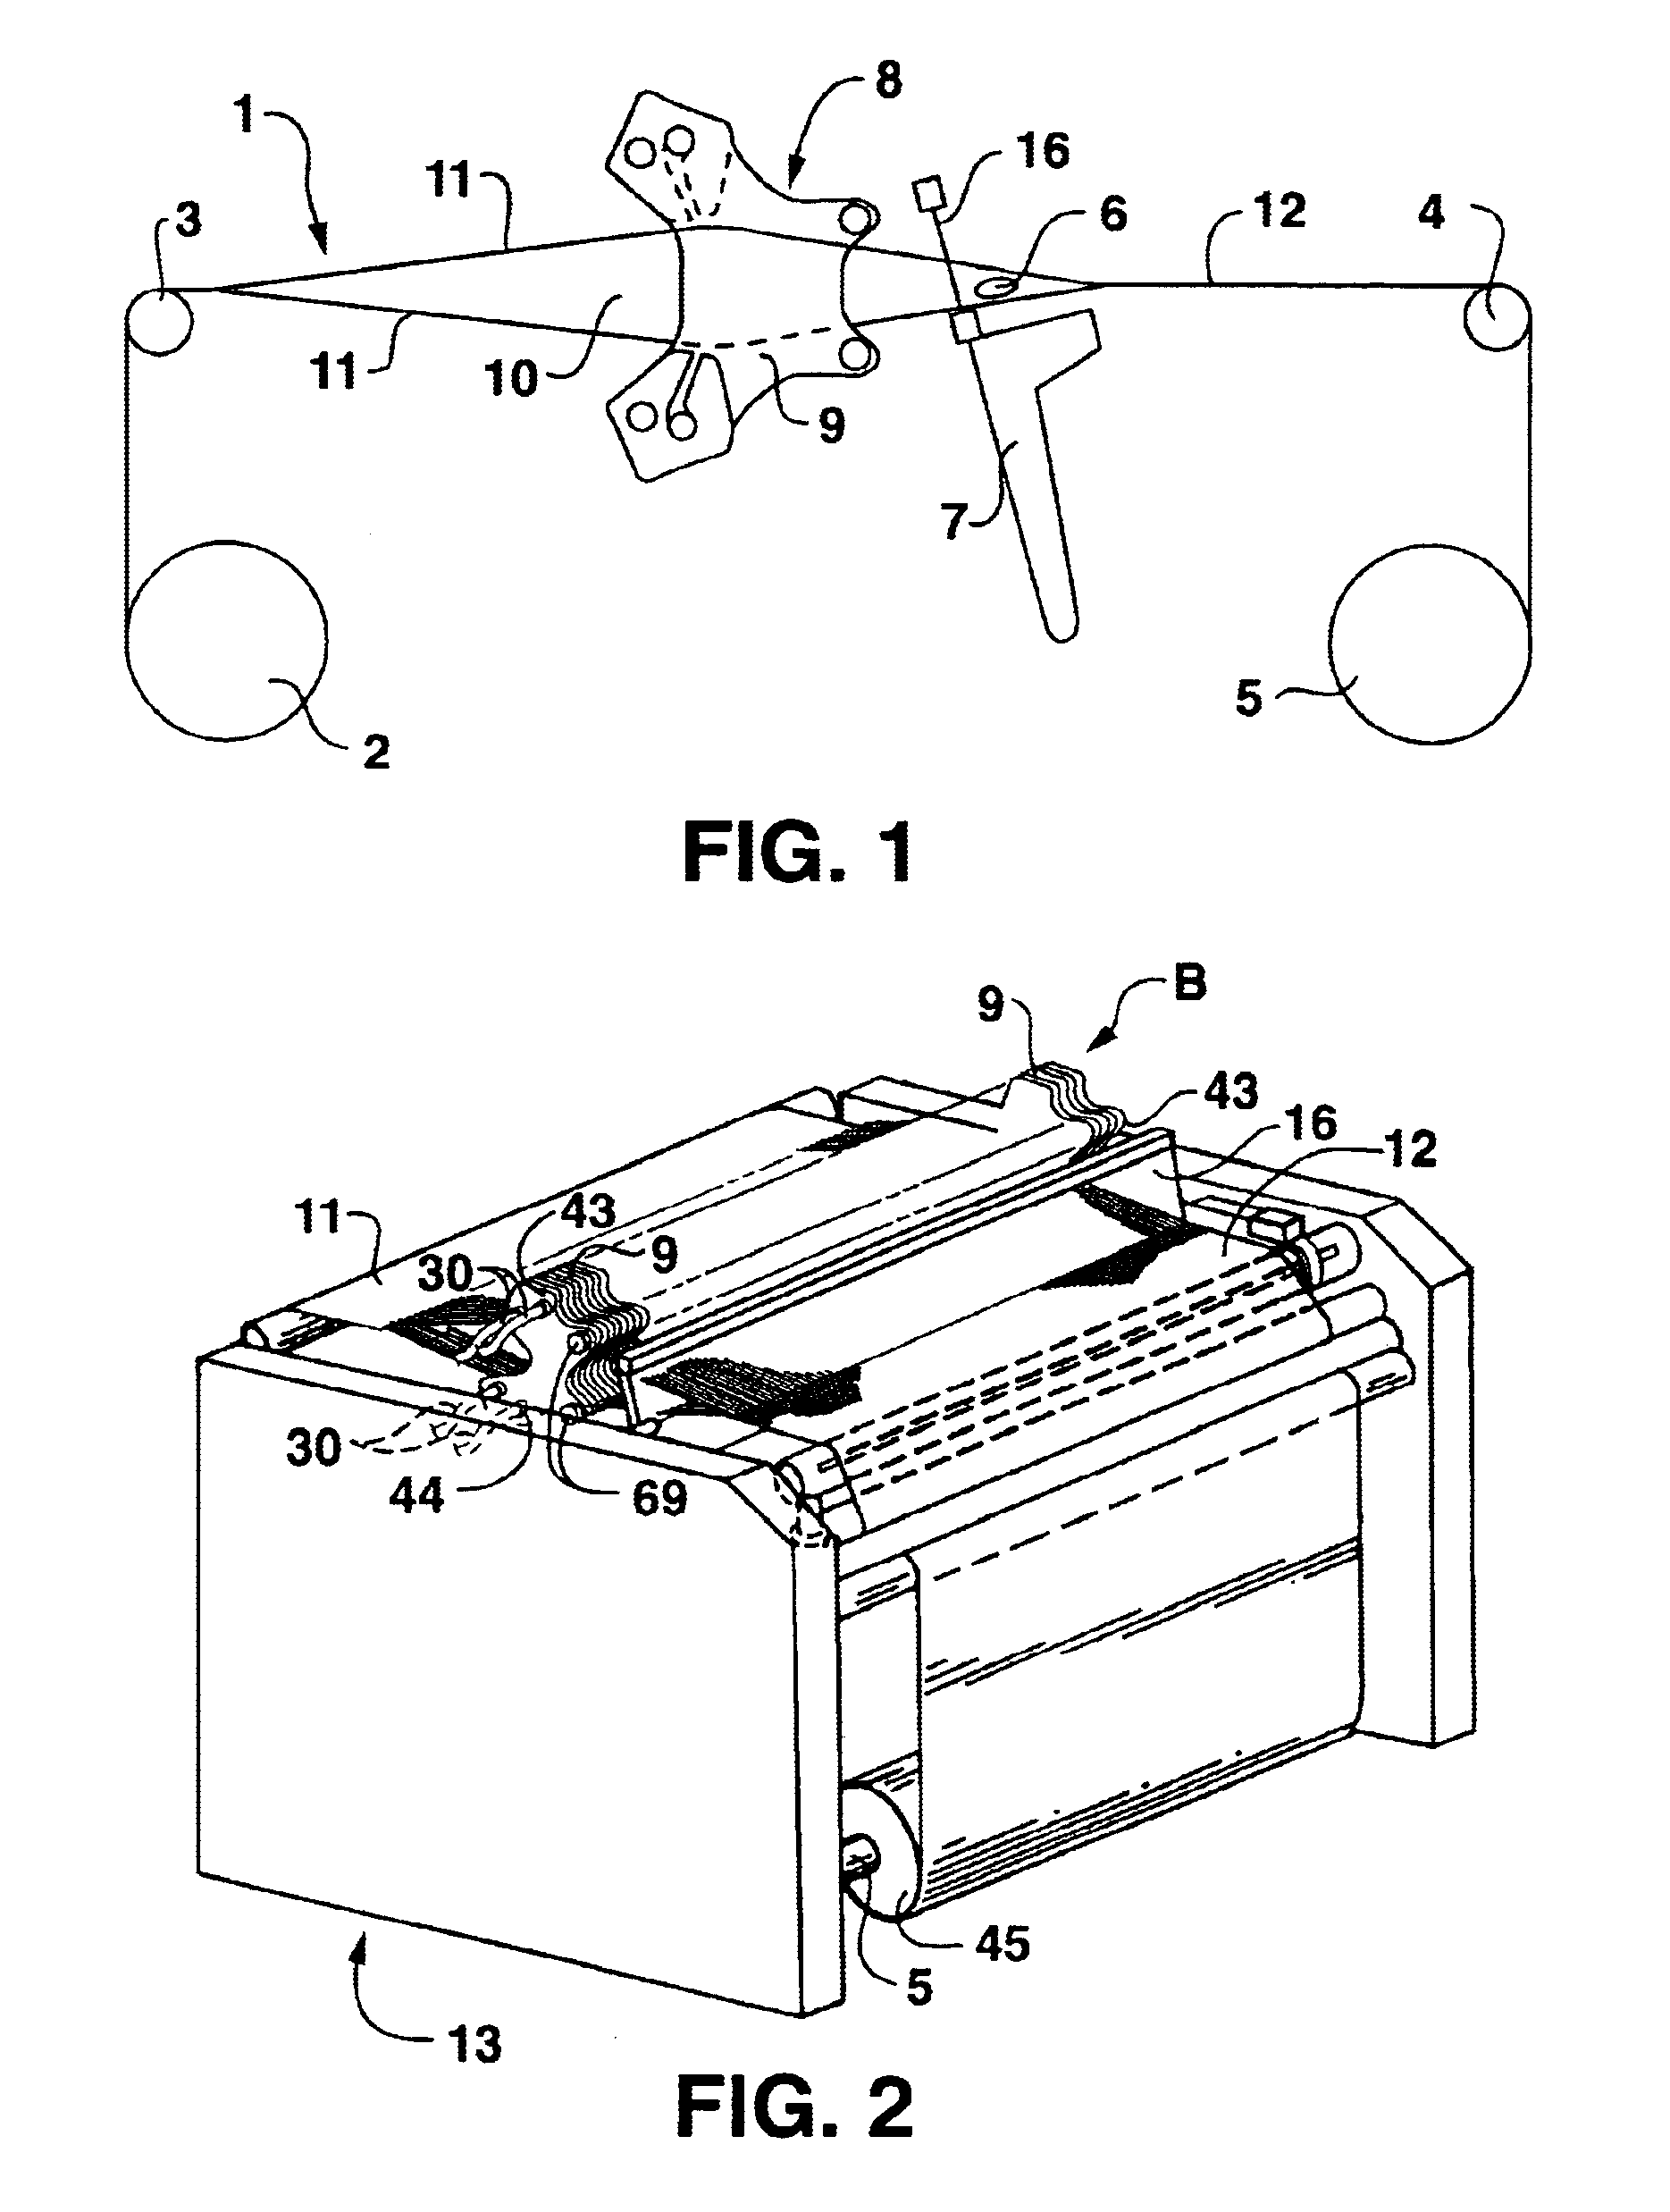 Method and device for forming a shed in a weaving machine